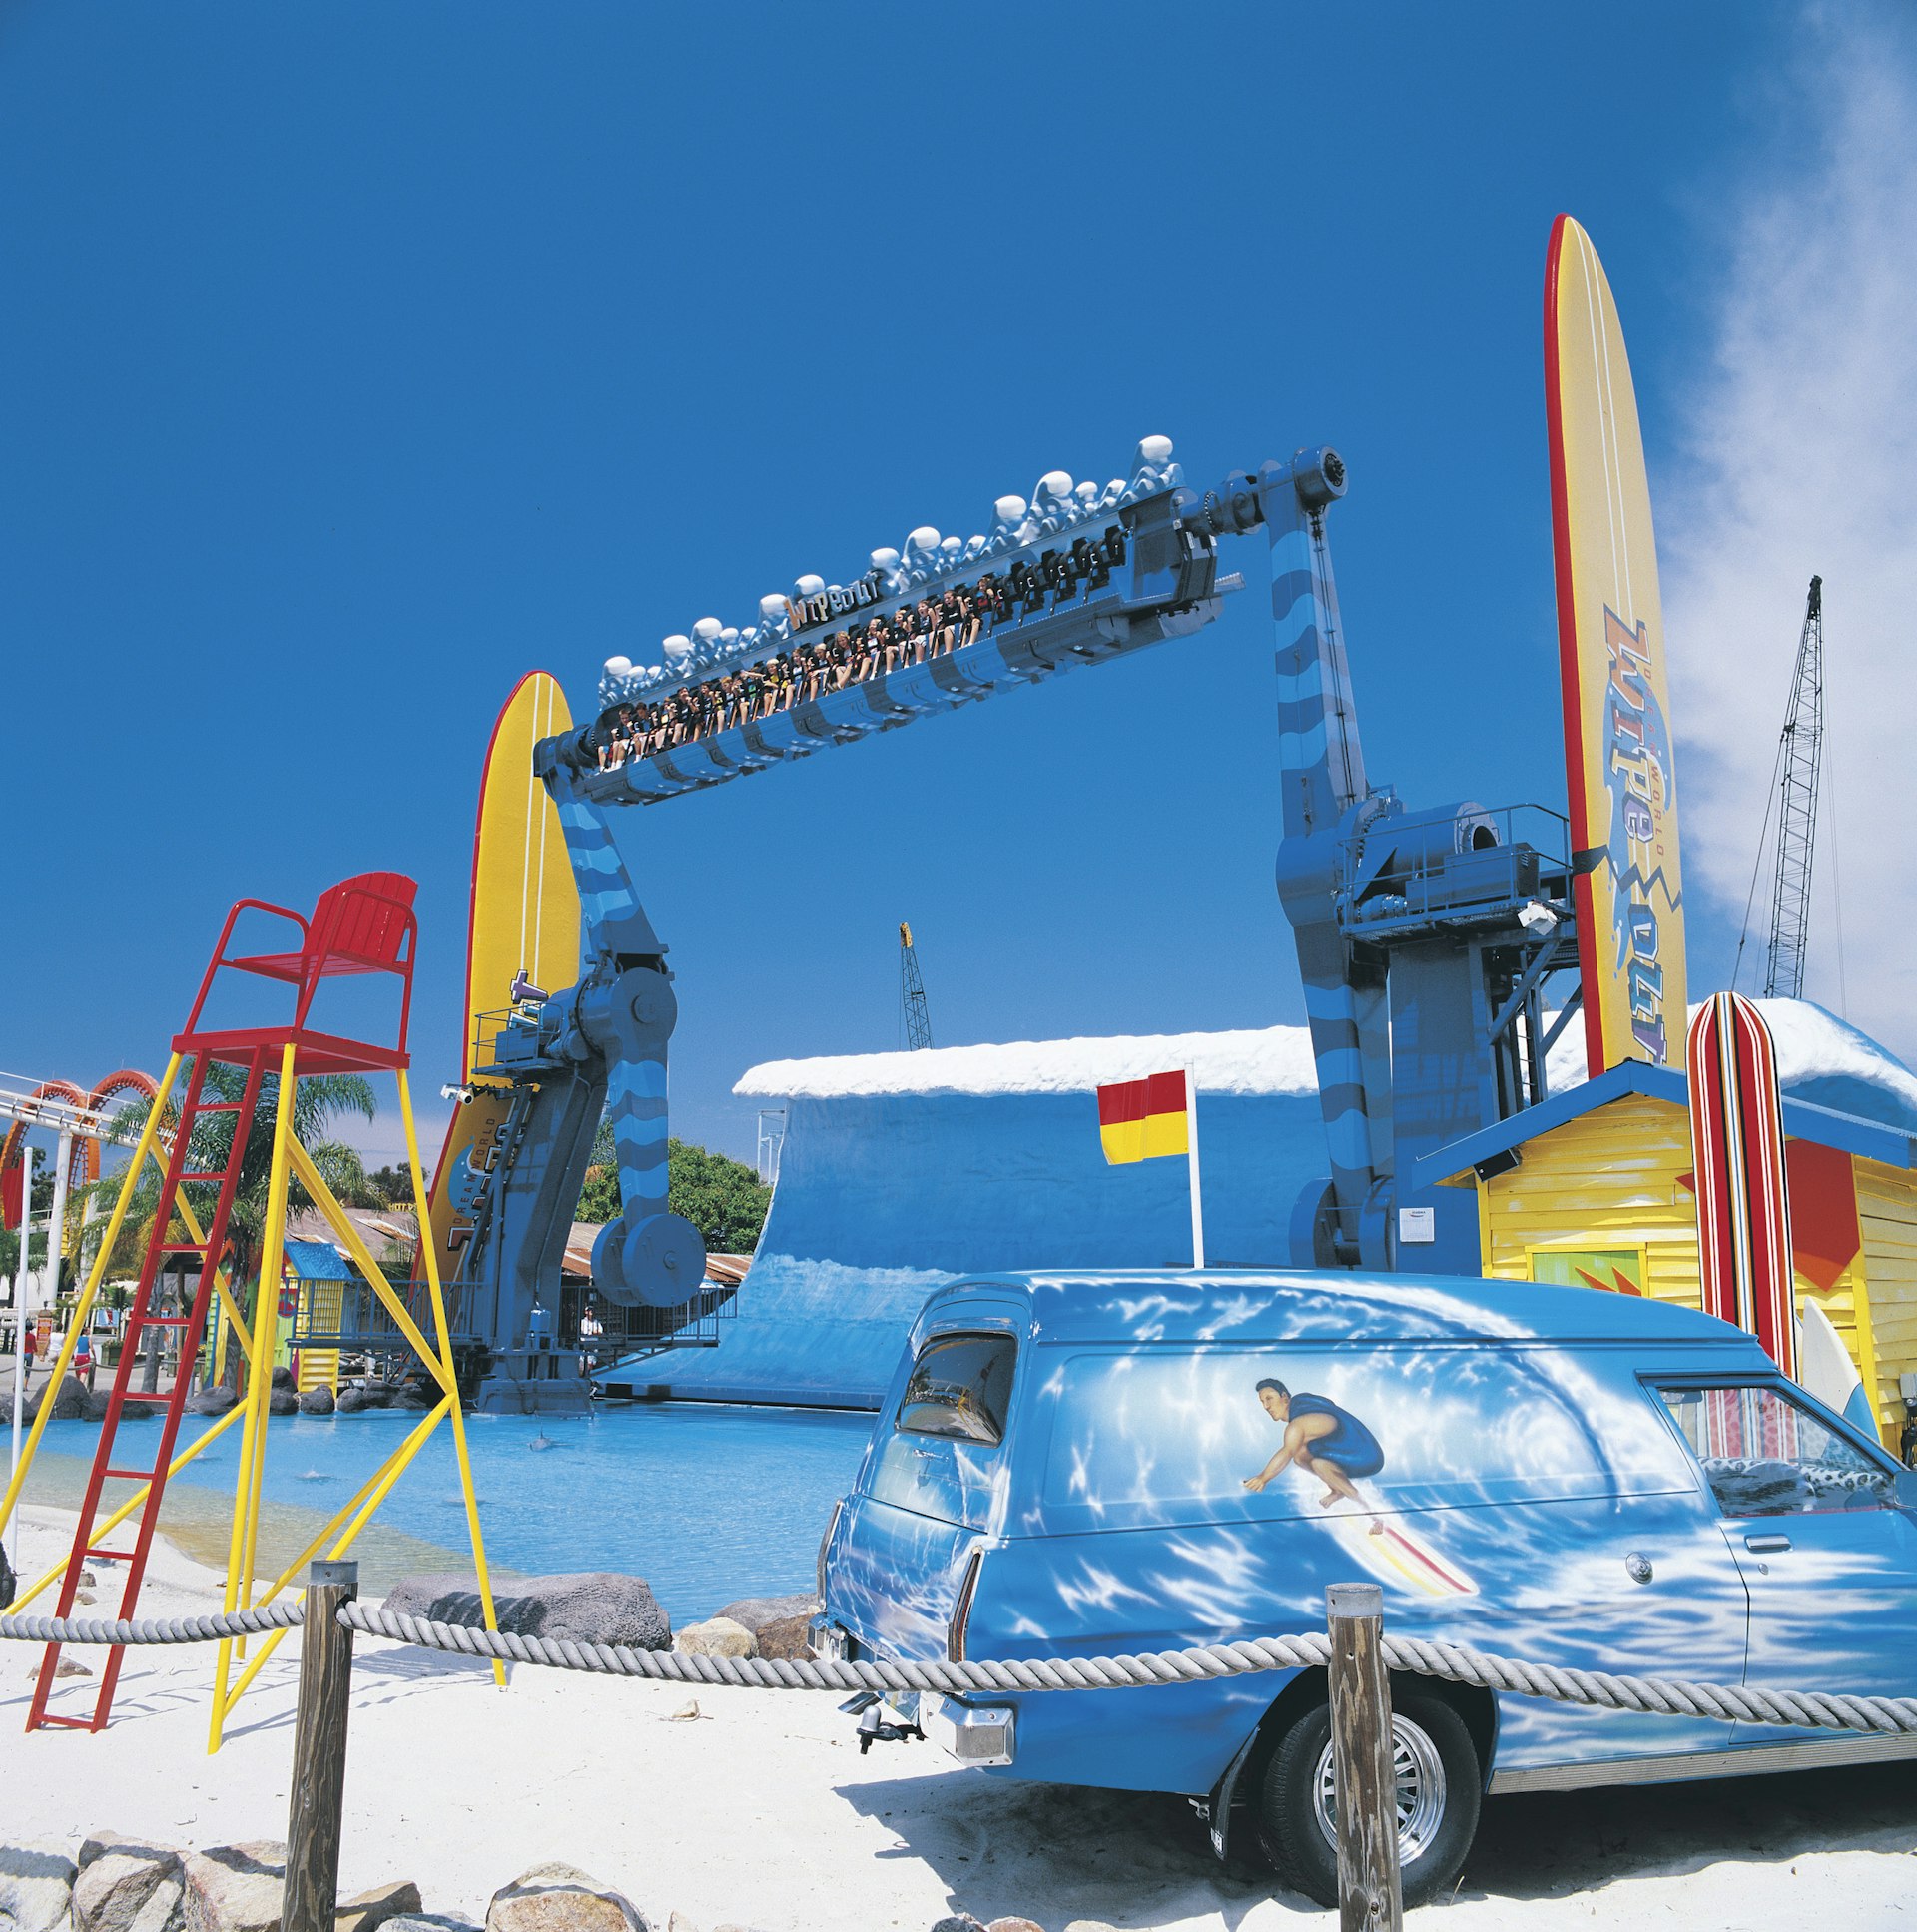 Features - Wipeout, Dreamworld